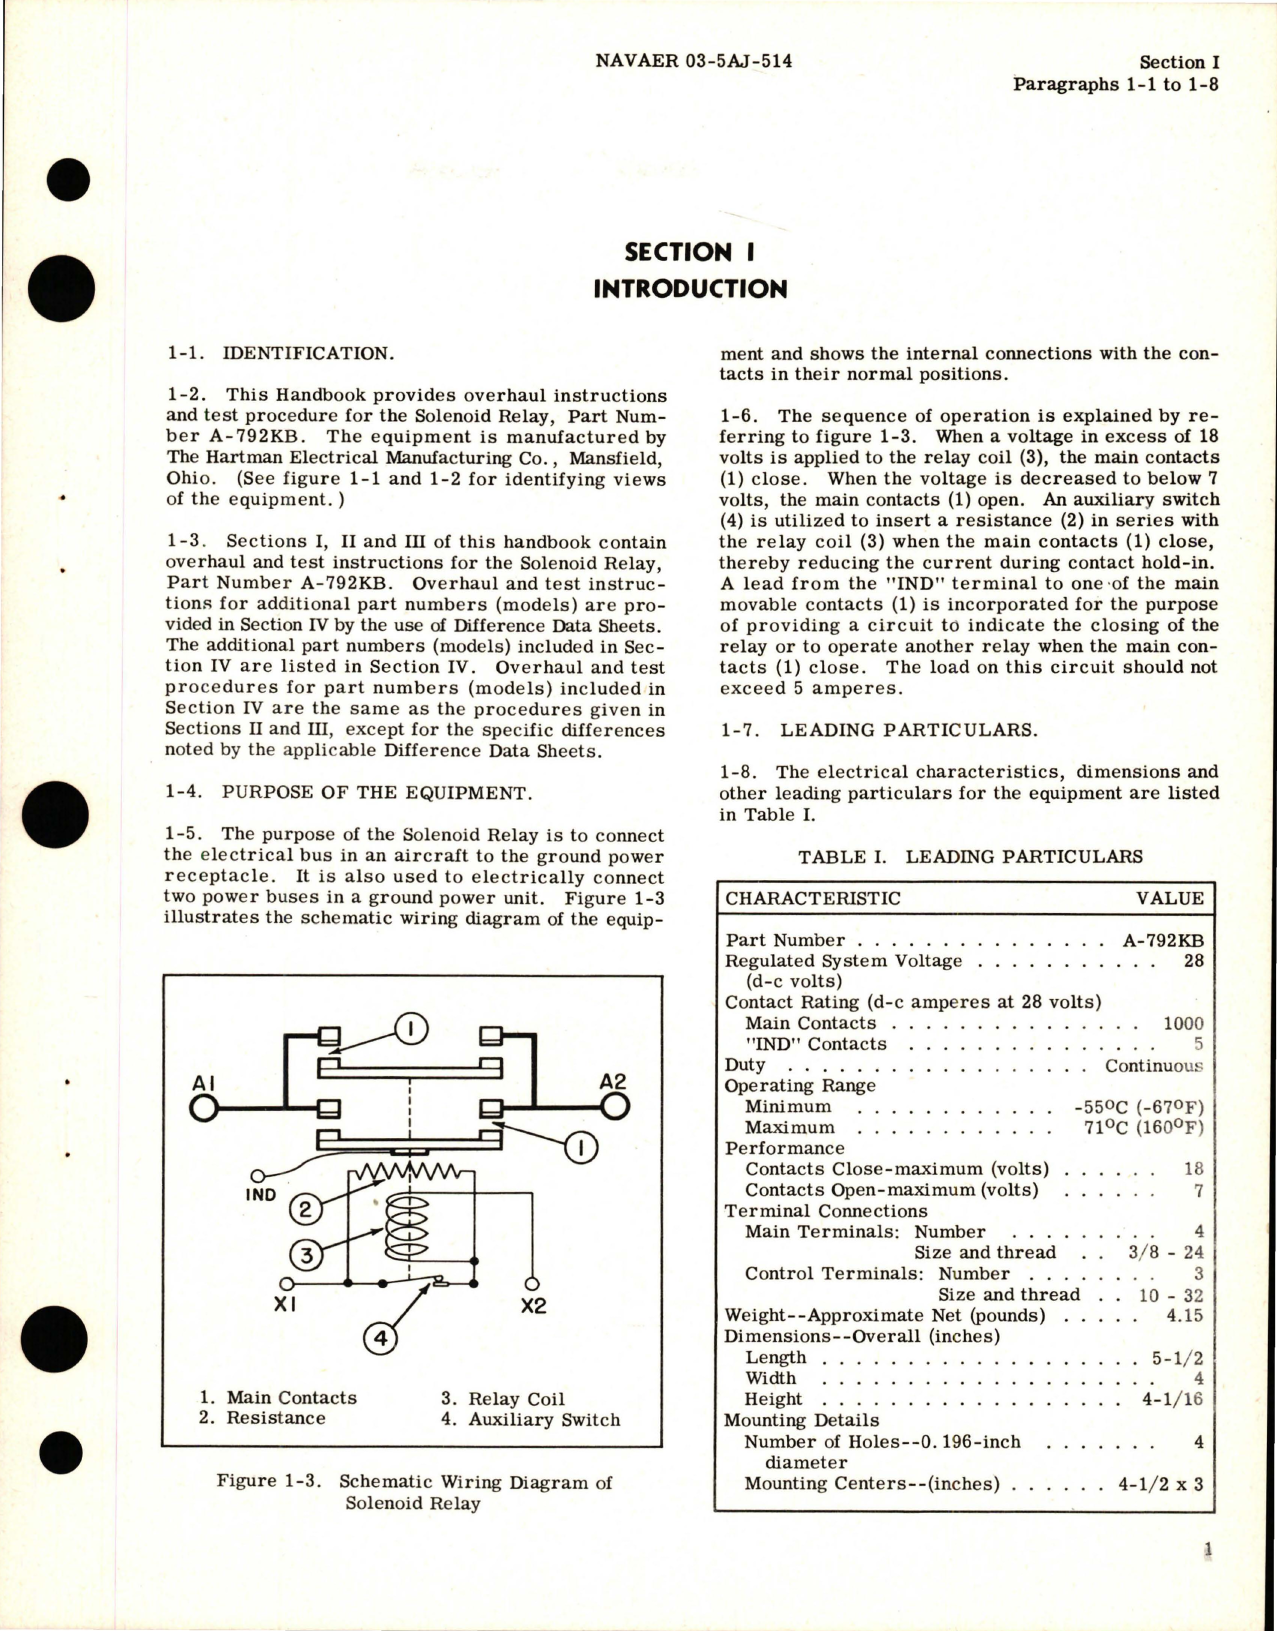 Sample page 5 from AirCorps Library document: Overhaul Instructions Solenoid Relay - Parts A-792 and A-792KB 